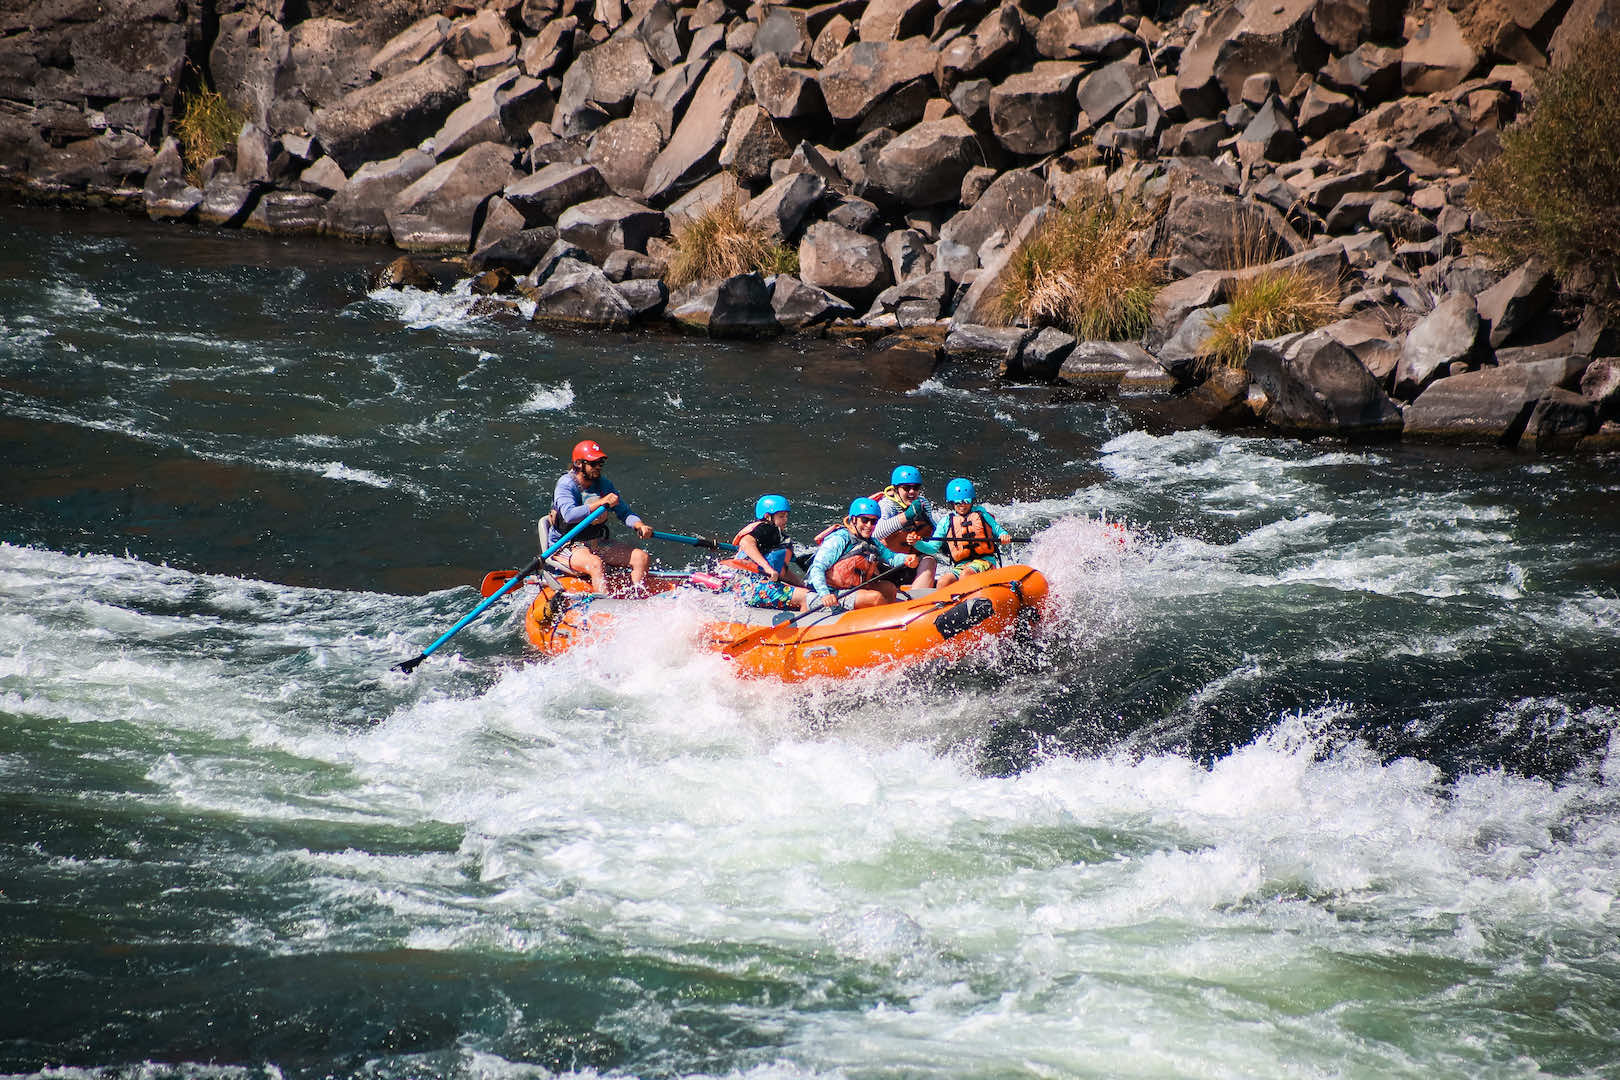 Whitewater rafting on the Deschutes River, Oregon